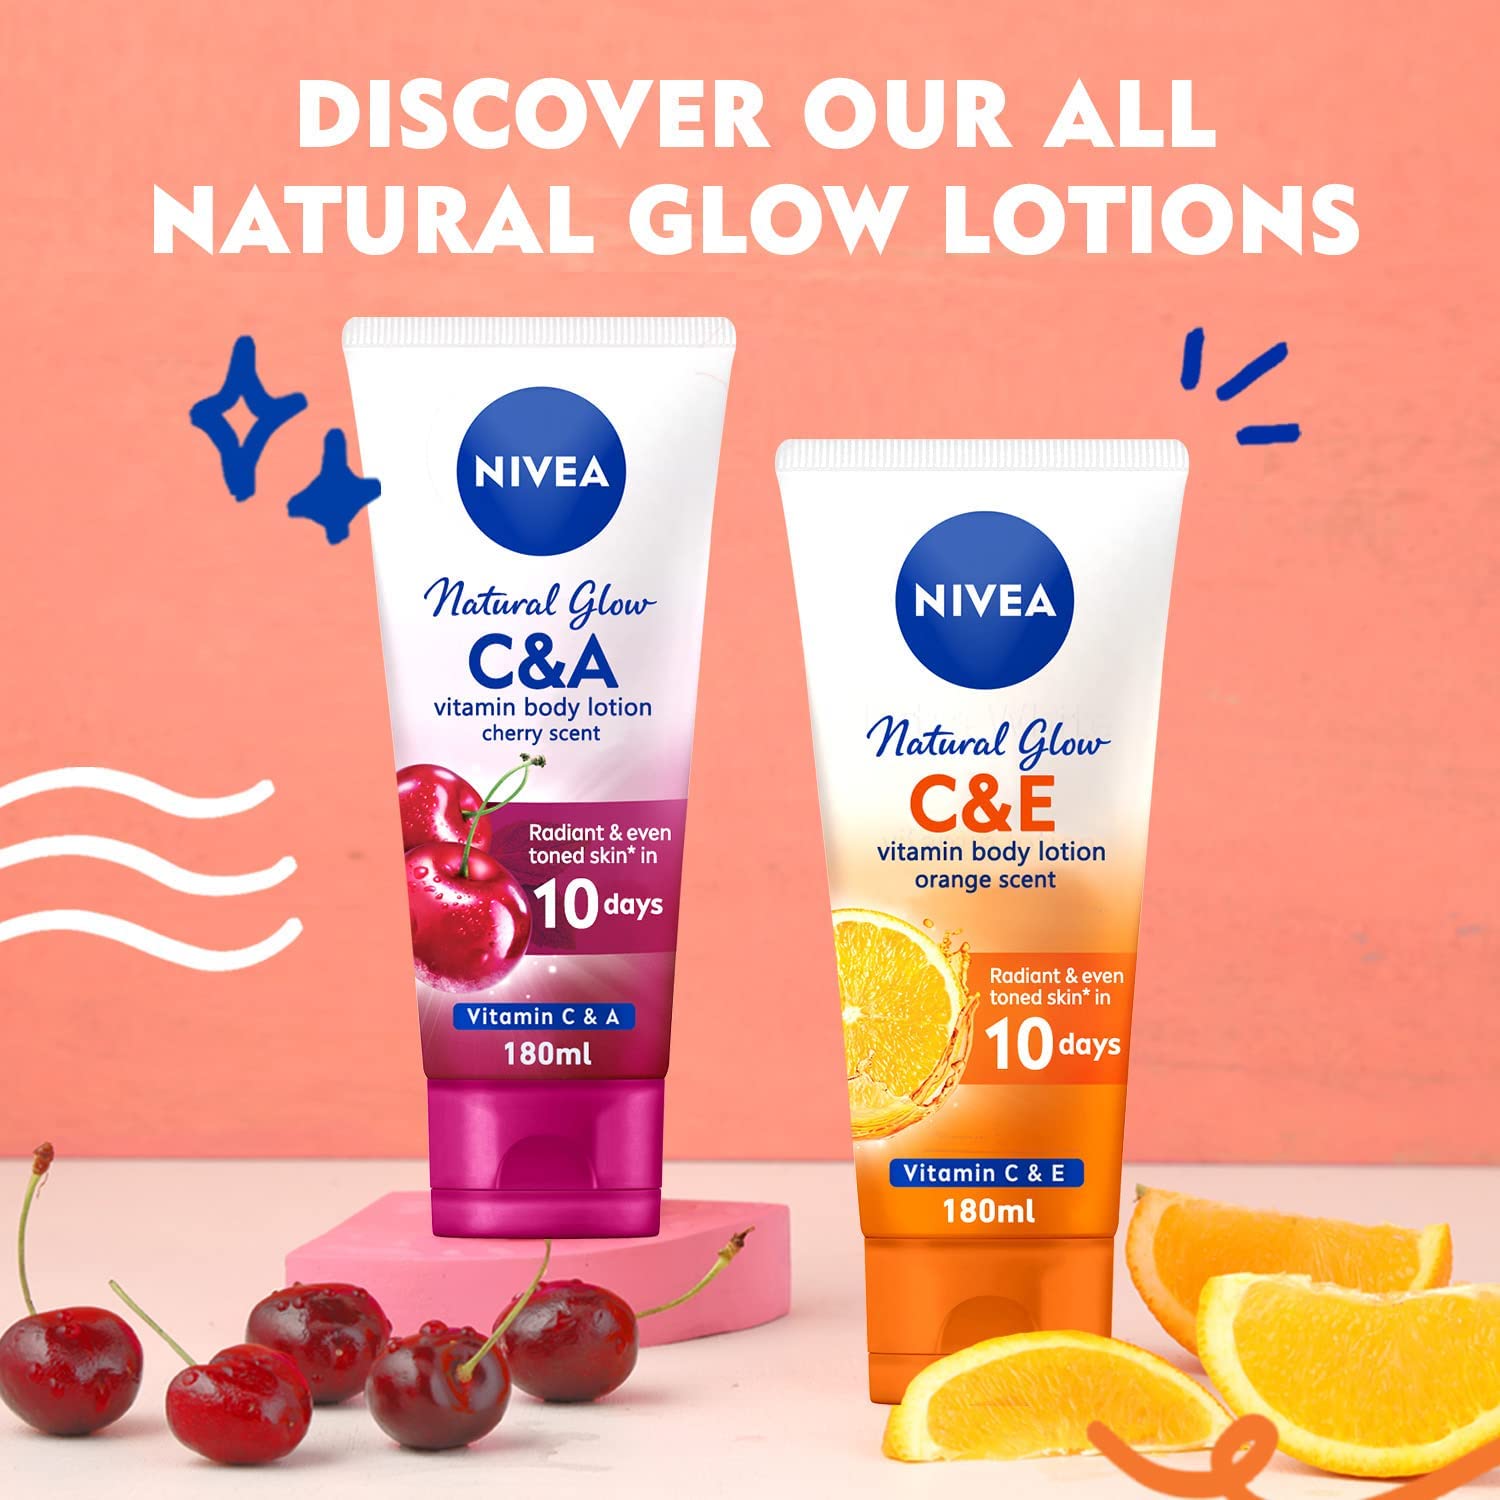 NIVEA Natural Glow Vitamin C And A Cherry Scented Body Lotion